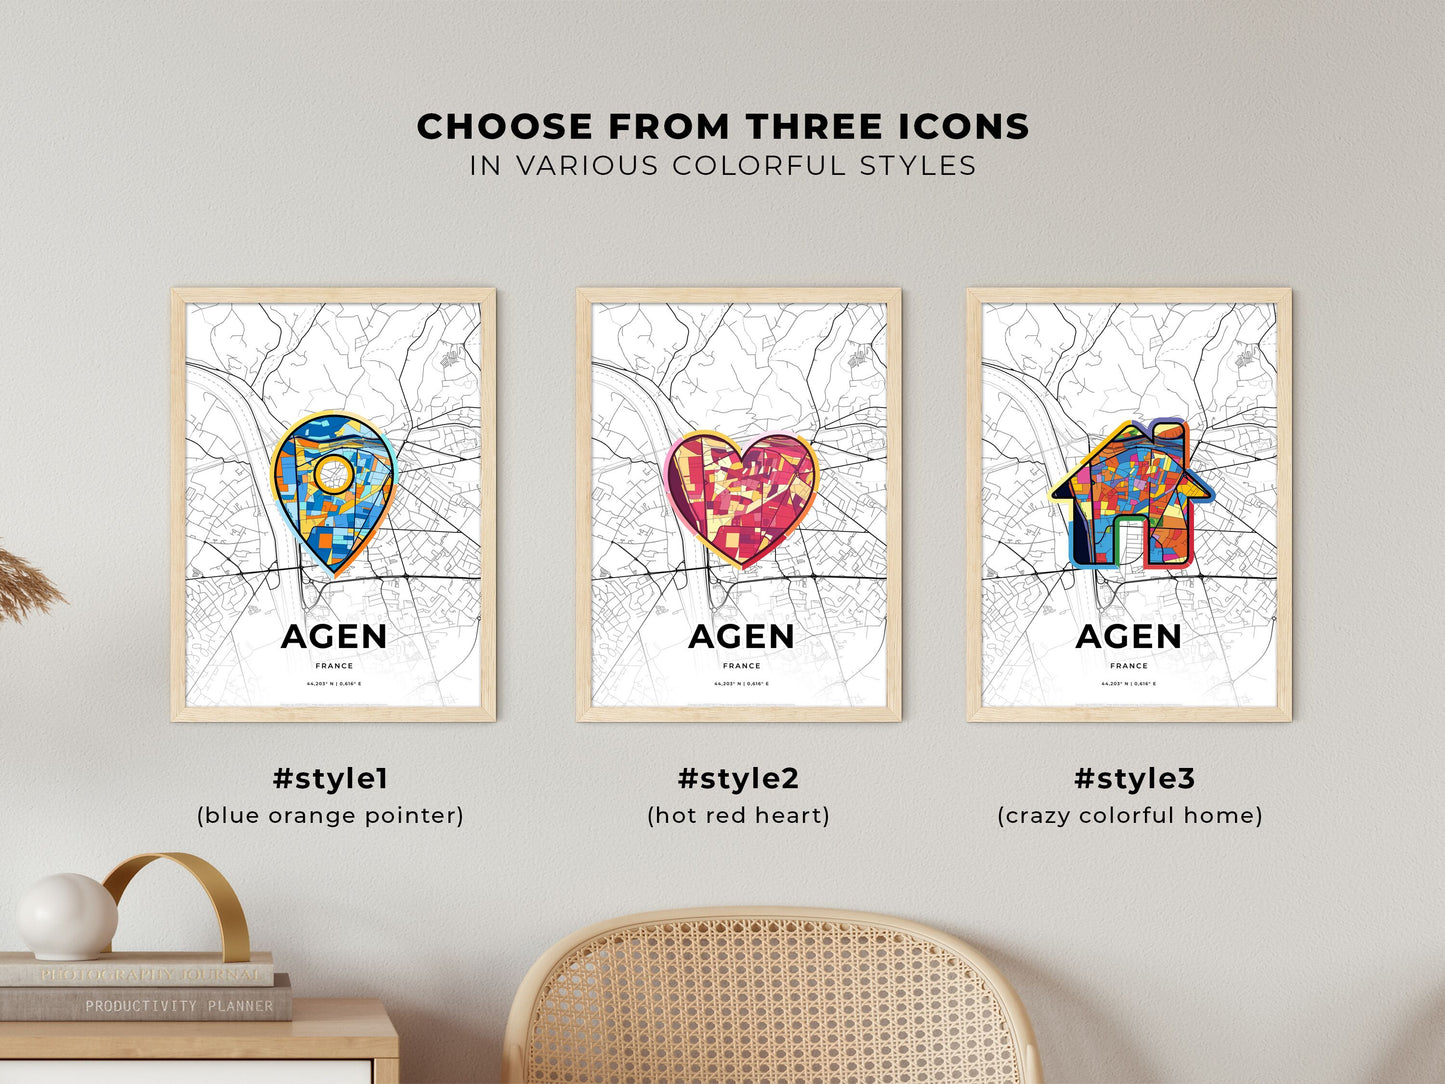 AGEN FRANCE minimal art map with a colorful icon. Where it all began, Couple map gift.